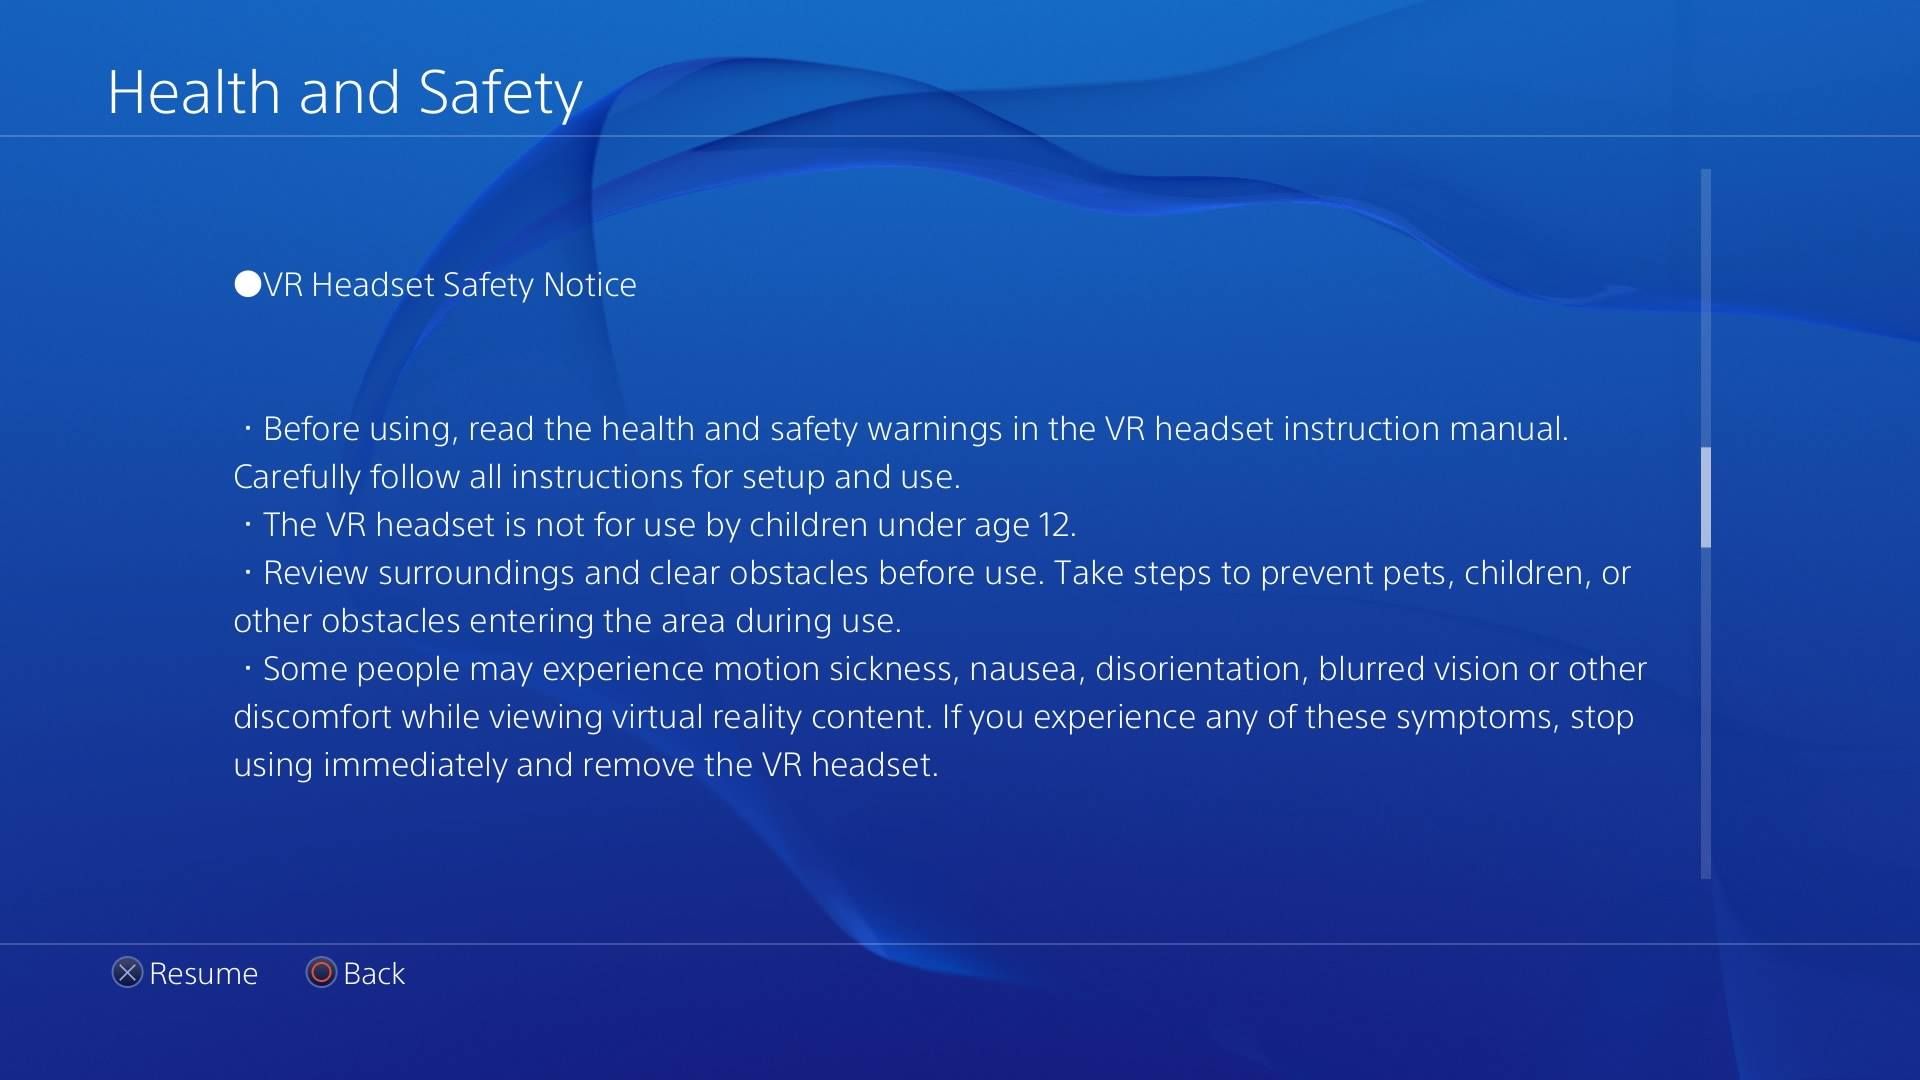 playstation vr not suitable for under 12s beat it pipsqueaks image 2